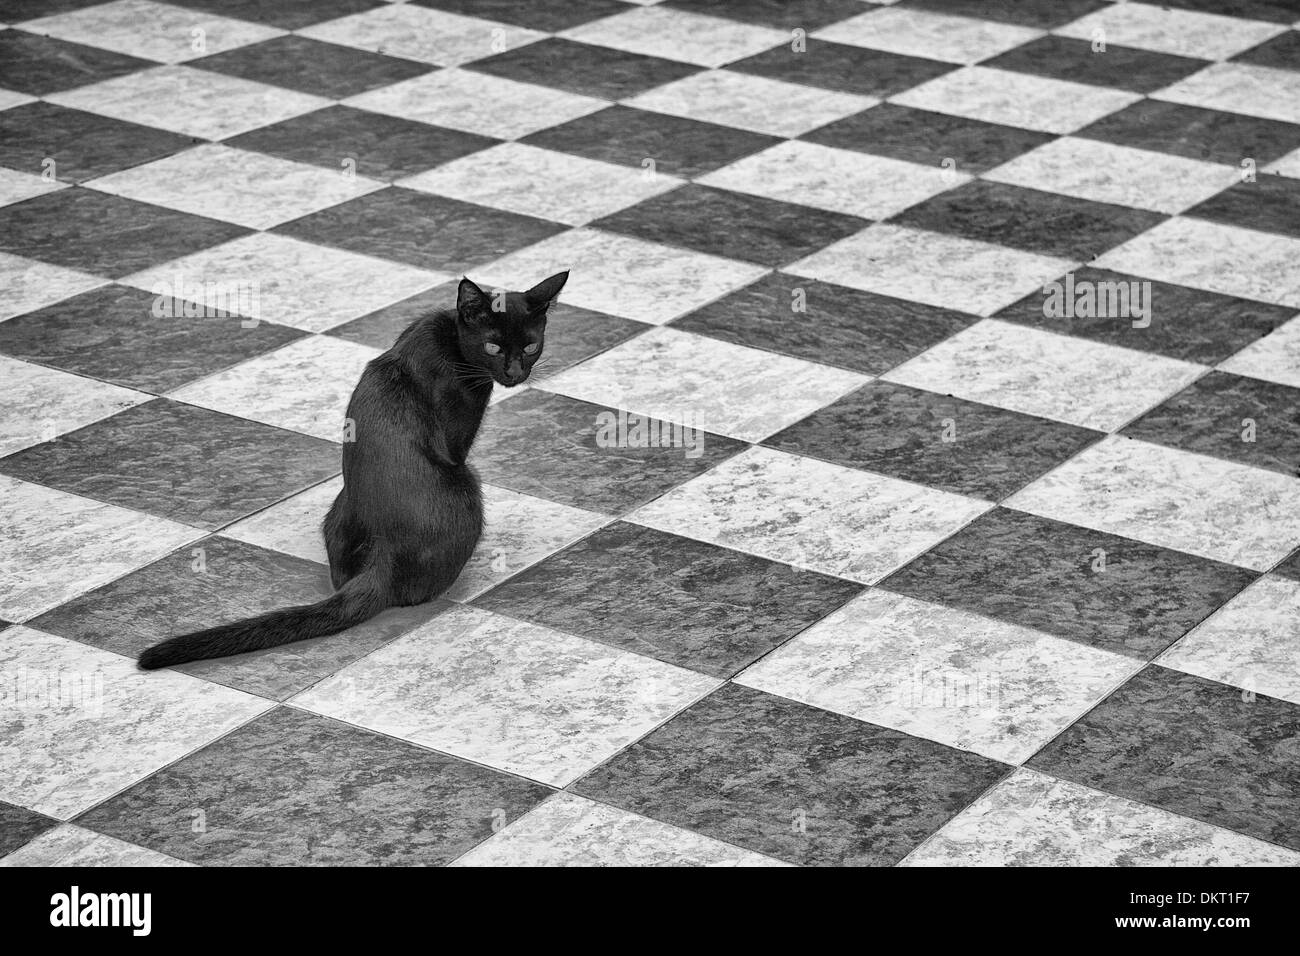 Black cat on black and white tiles, check pattern Stock Photo